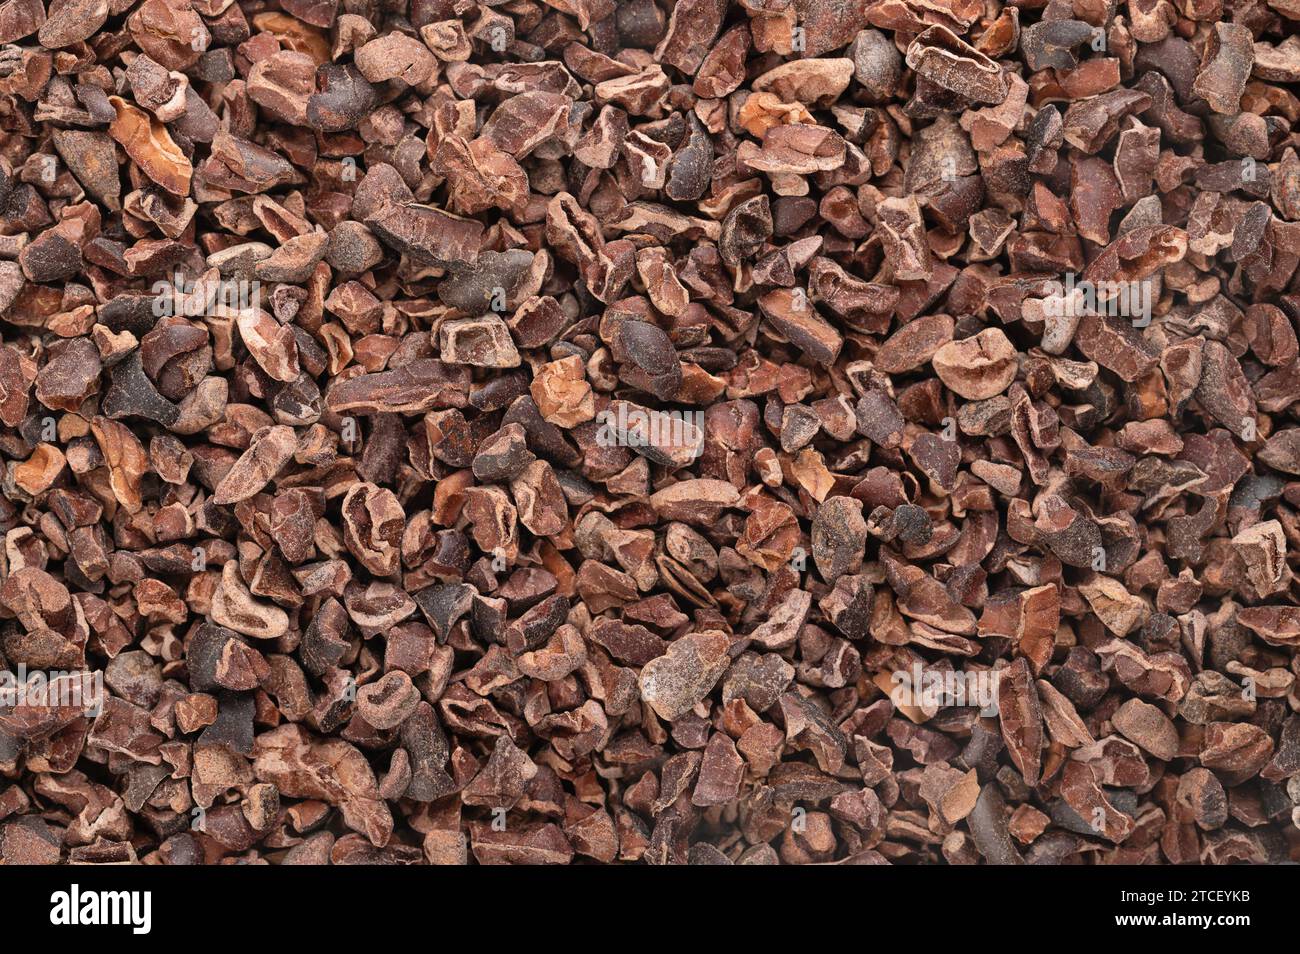 Cocoa nibs. Background with crushed dried fermented kernels of cocoa beans, seeds of Theobroma cacao, generally processed into chocolate. Stock Photo